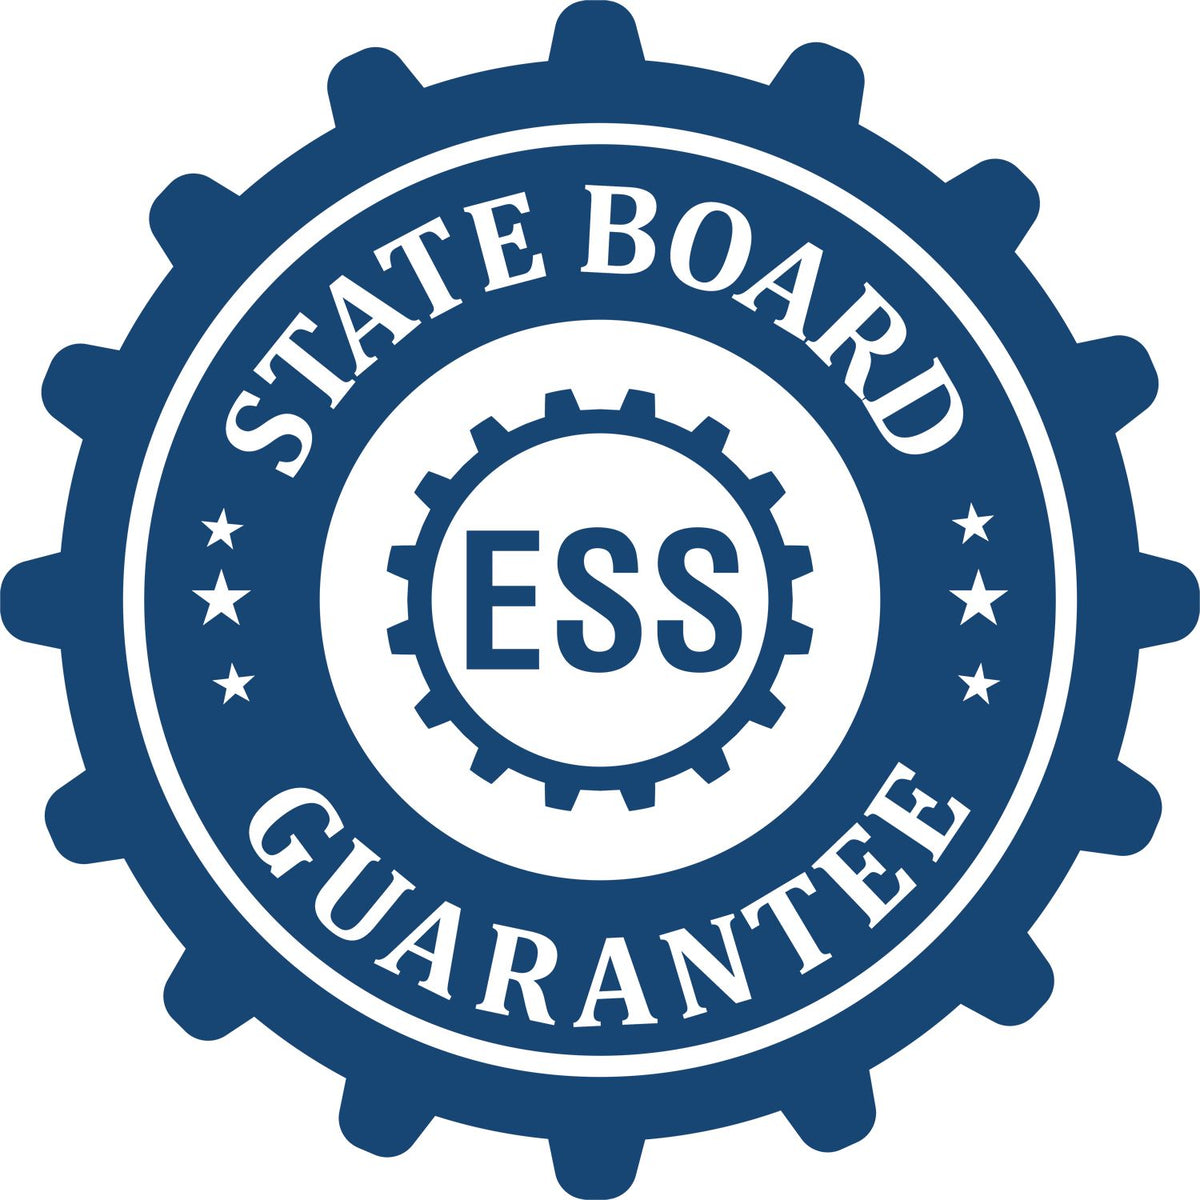 An emblem in a gear shape illustrating a state board guarantee for the Premium MaxLight Pre-Inked Massachusetts Landscape Architectural Stamp product.